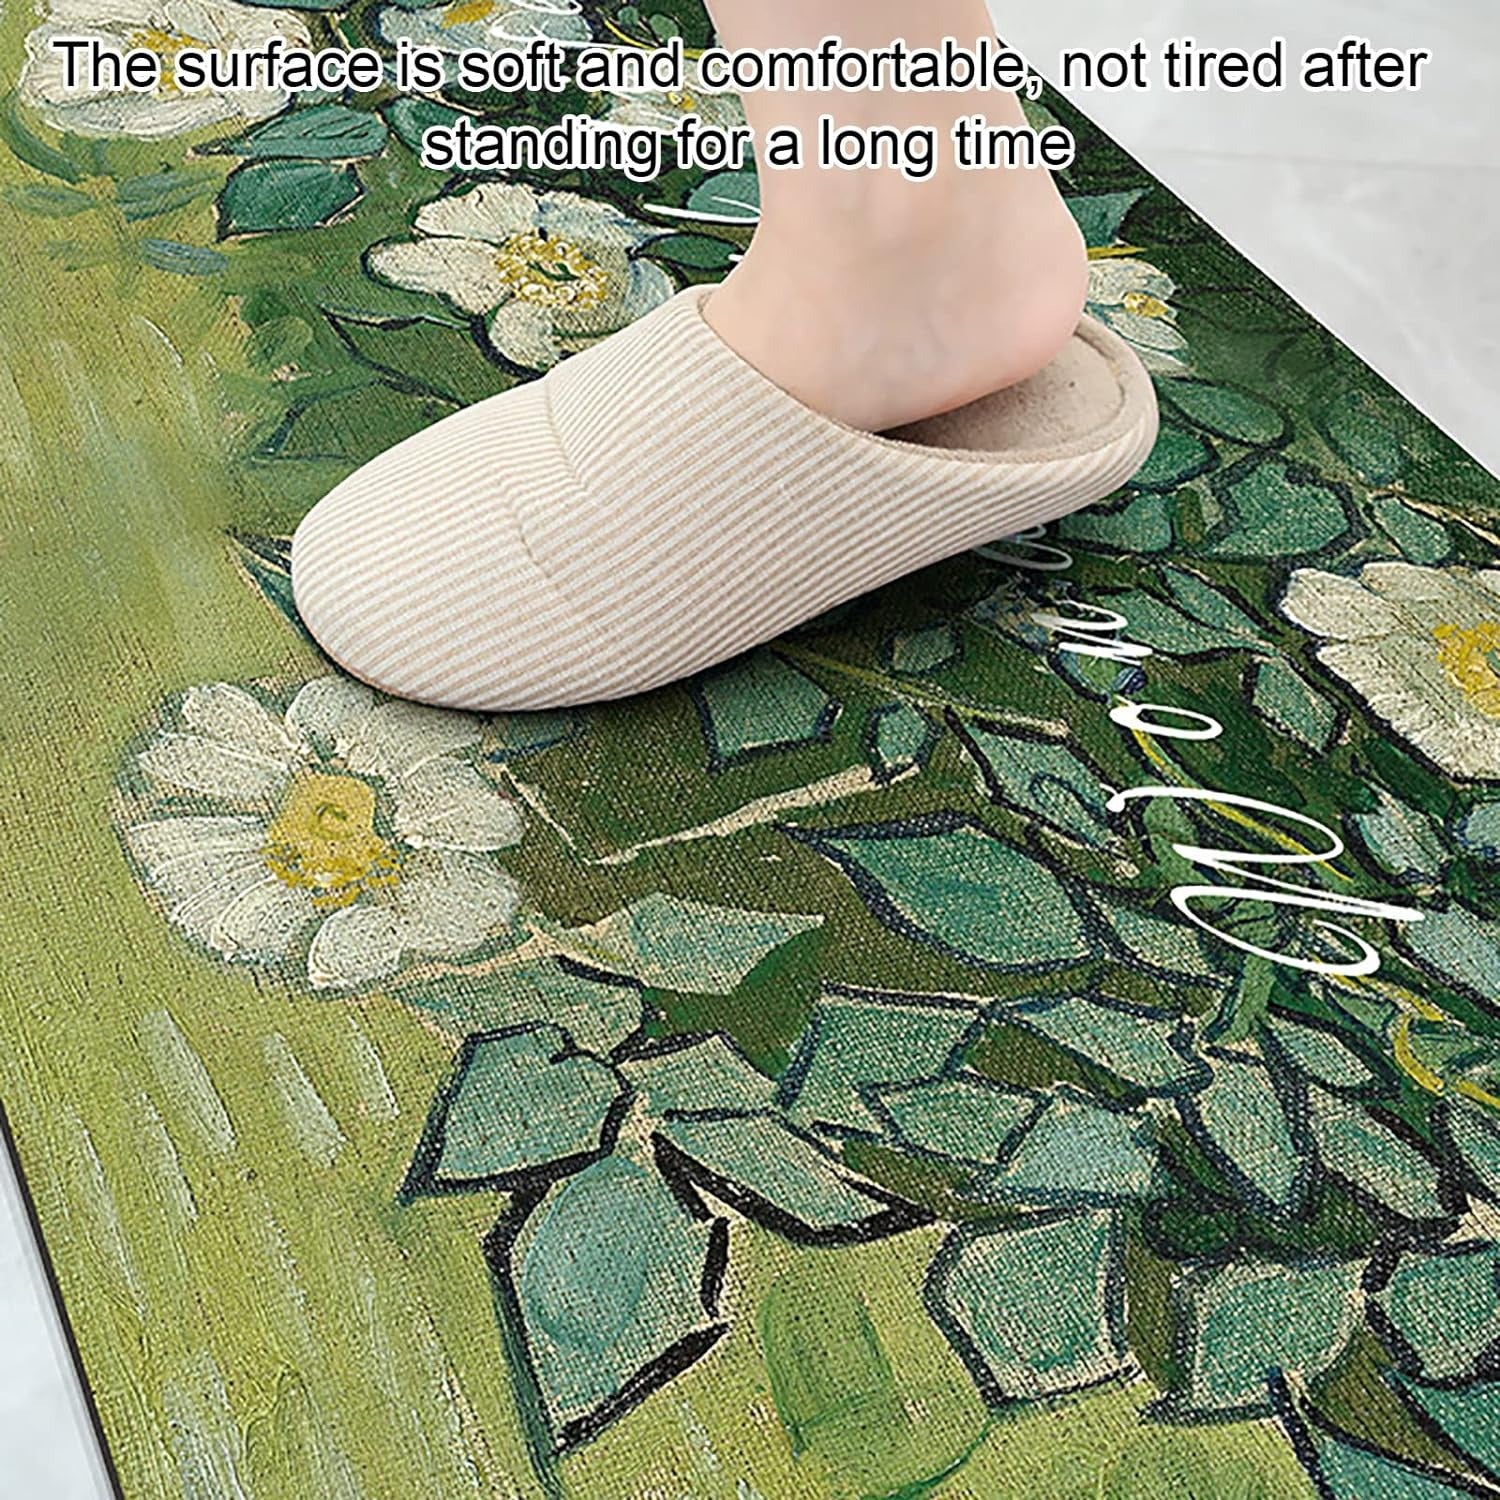 soft and comfortable mat